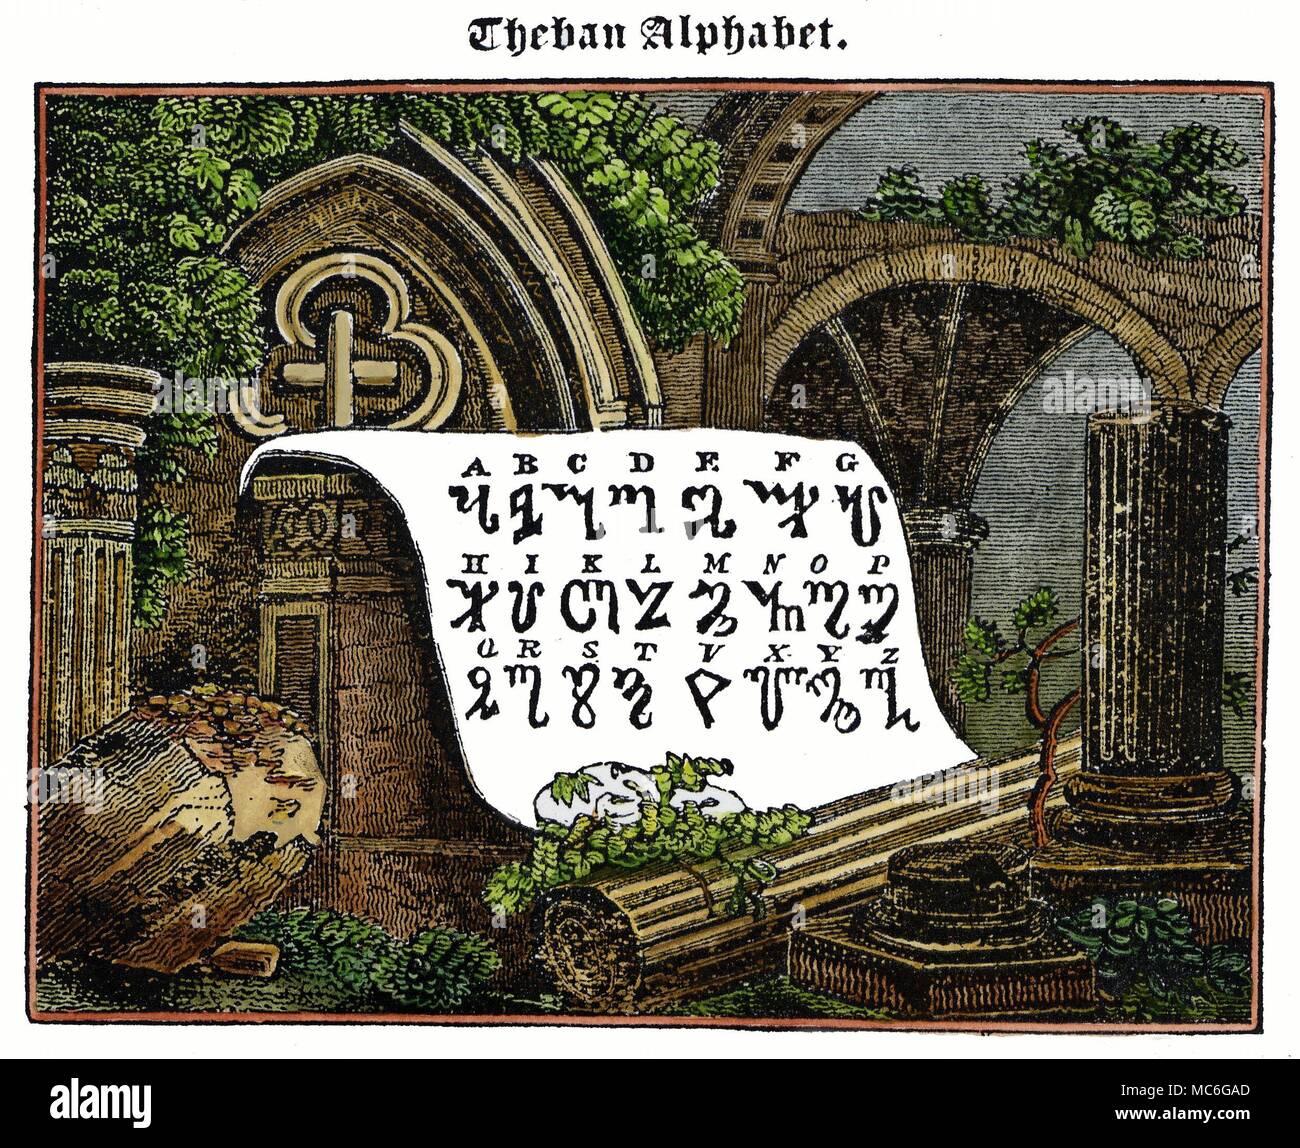 ALPHABETS - THEBAN SCRIPT The mediaeval Theban script, with modern key, attributed to Honorius, but certainly based on the alphabet preserved by Cornelius Agrippa in De Occulta Philosophia, 1534. Hand-coloured wood engraving - illustration No. XVI from The Straggling Astrologer of the Nineteenth Century, 1848. In the Charles Walker archives are a number of wiccan magical implements in which the Theban script have been used. Stock Photo